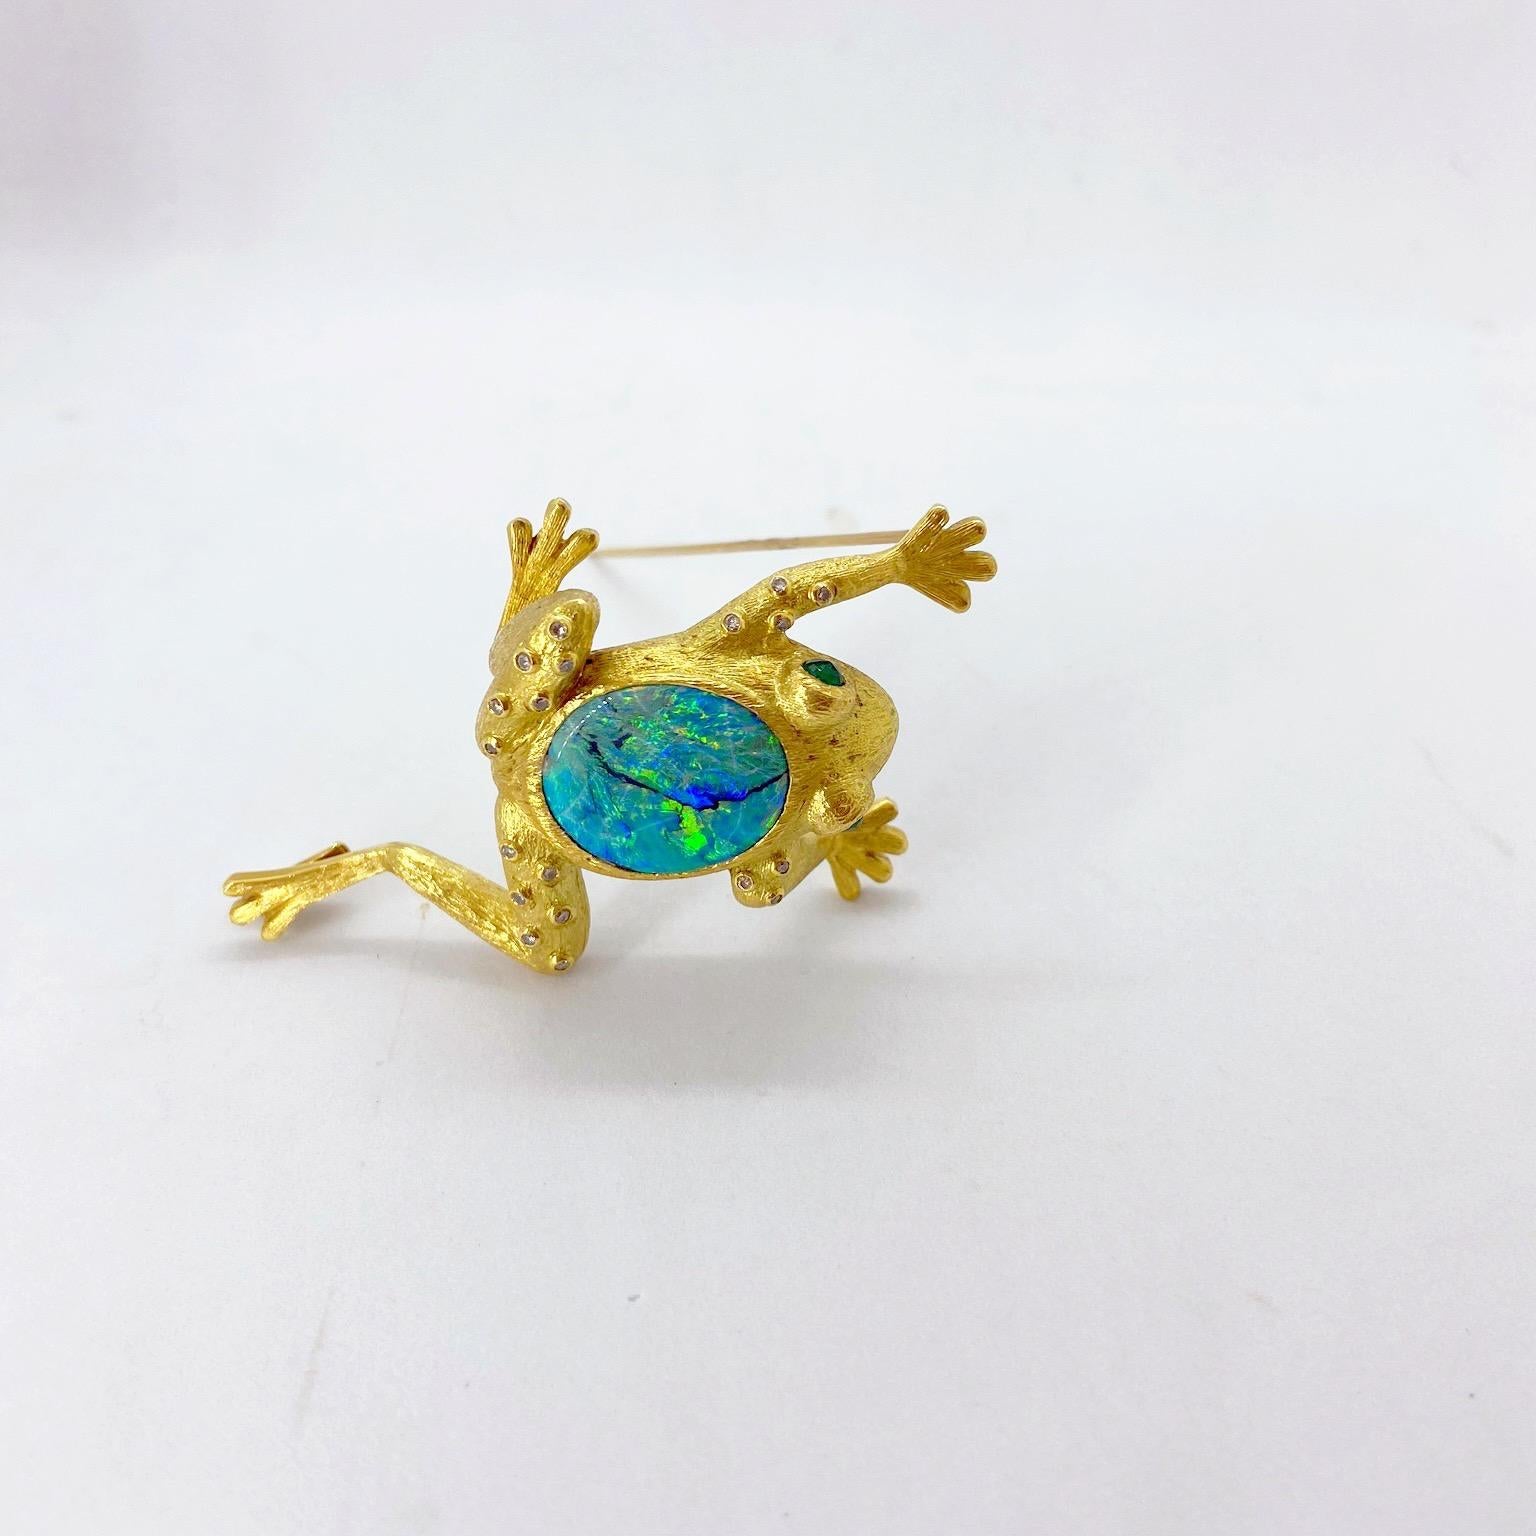 This Lovely 18 karat yellow gold frog brooch features a 9.60 carat oval black opal center, faceted round emerald eyes and a sprinkle of diamonds on the frogs arms and legs. 
Opal = 9.60 carats
Diamonds = 0.21 carats
Emeralds = 0.04 carats
Stamped